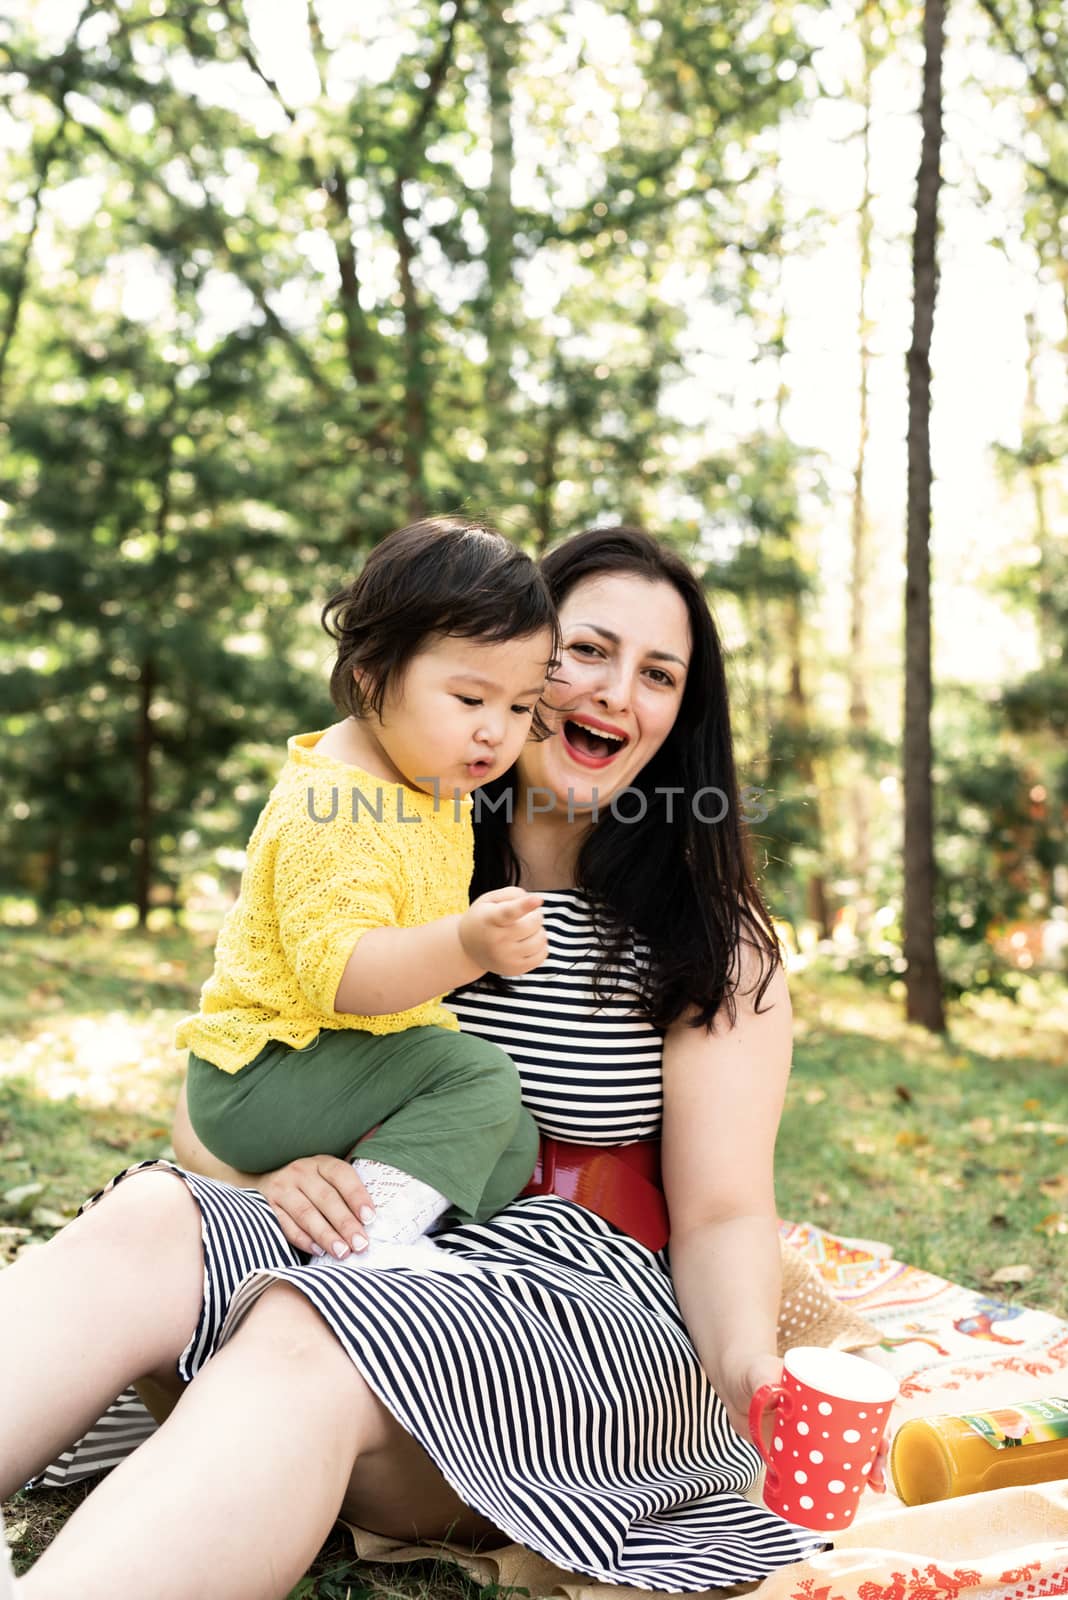 Multiethnic family. Happy multiracial family of mother and daughter in the park on a picnic